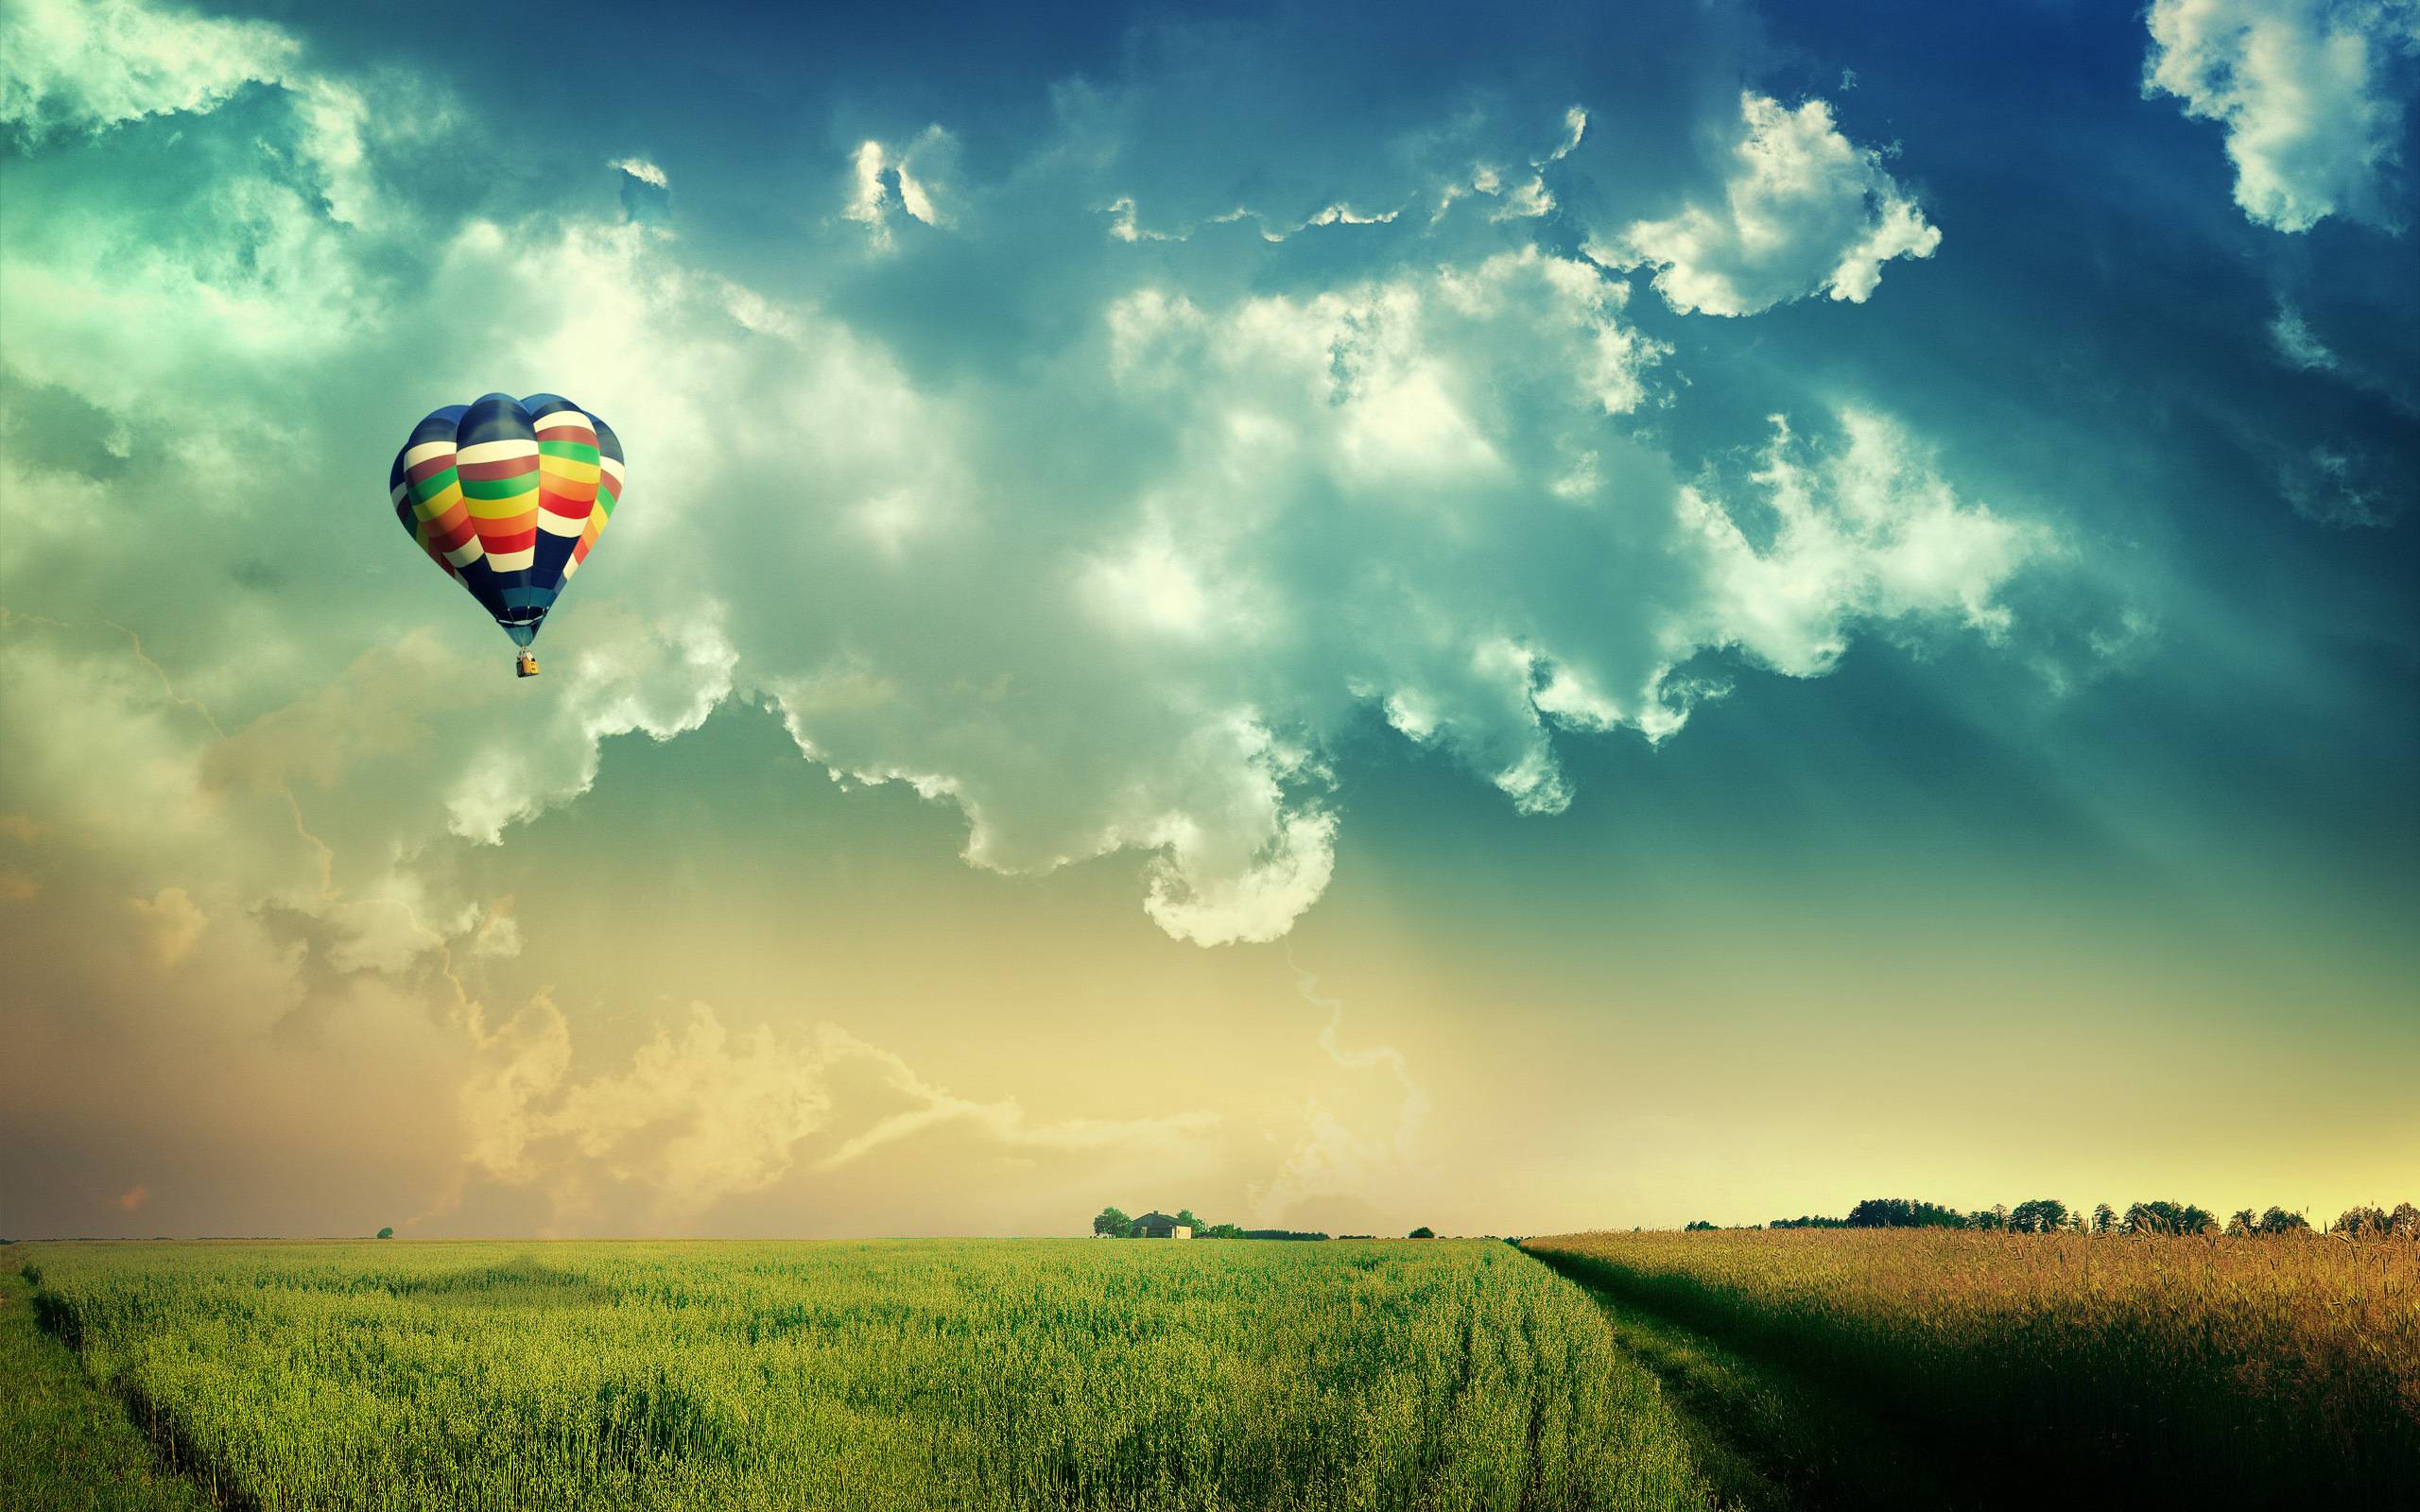 Beautiful Places image hot air balloon HD wallpaper and background